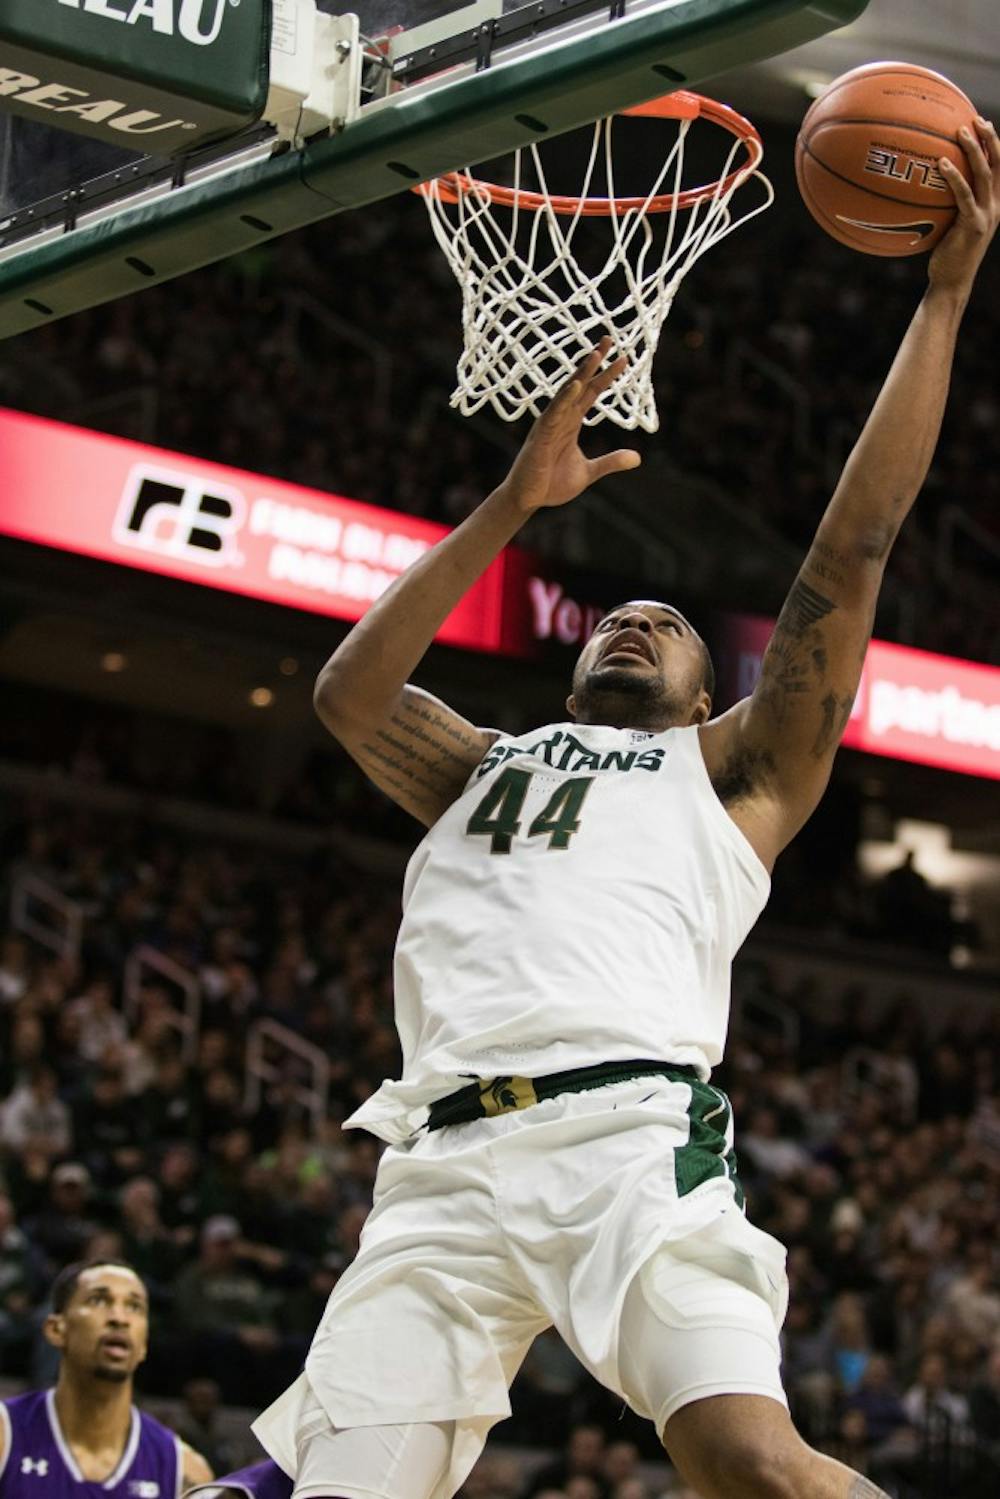 Junior forward Nick Ward (44) makes a basket during the game against Northwestern University at Breslin Center on Jan. 2, 2019. The Spartans defeated the Wildcats, 81-55.